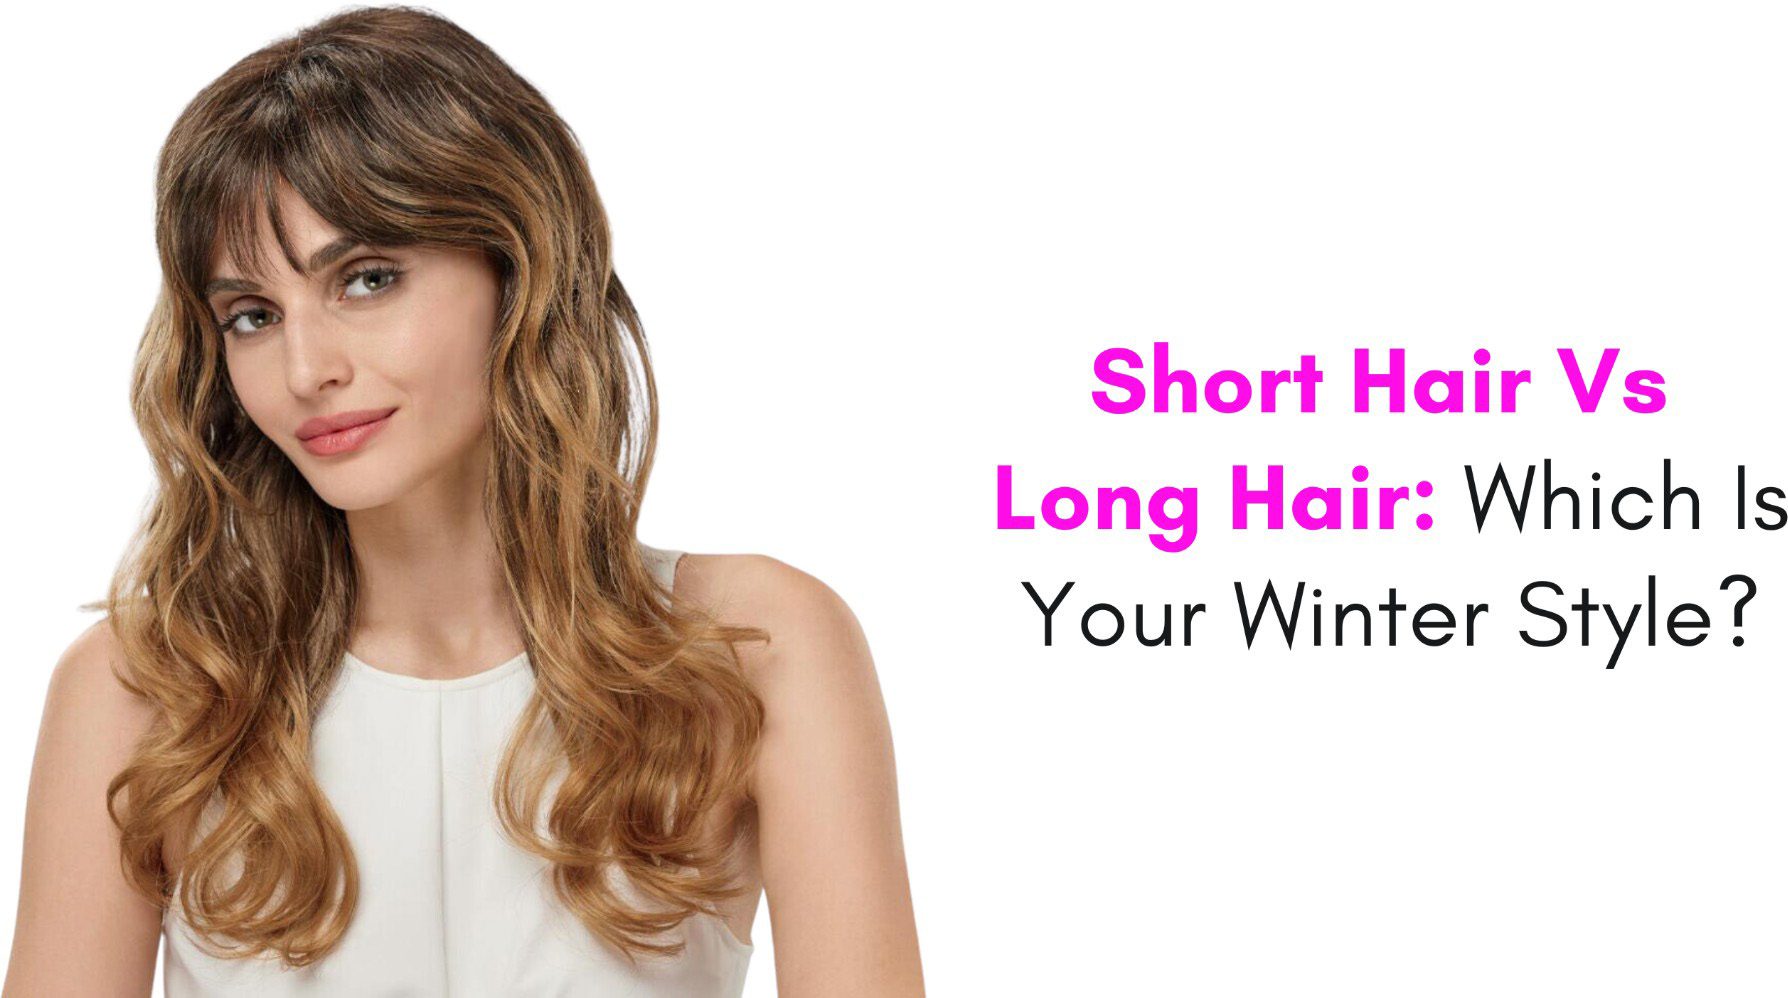 Short Hair Vs Long Hair: Which Is Your Winter Style?